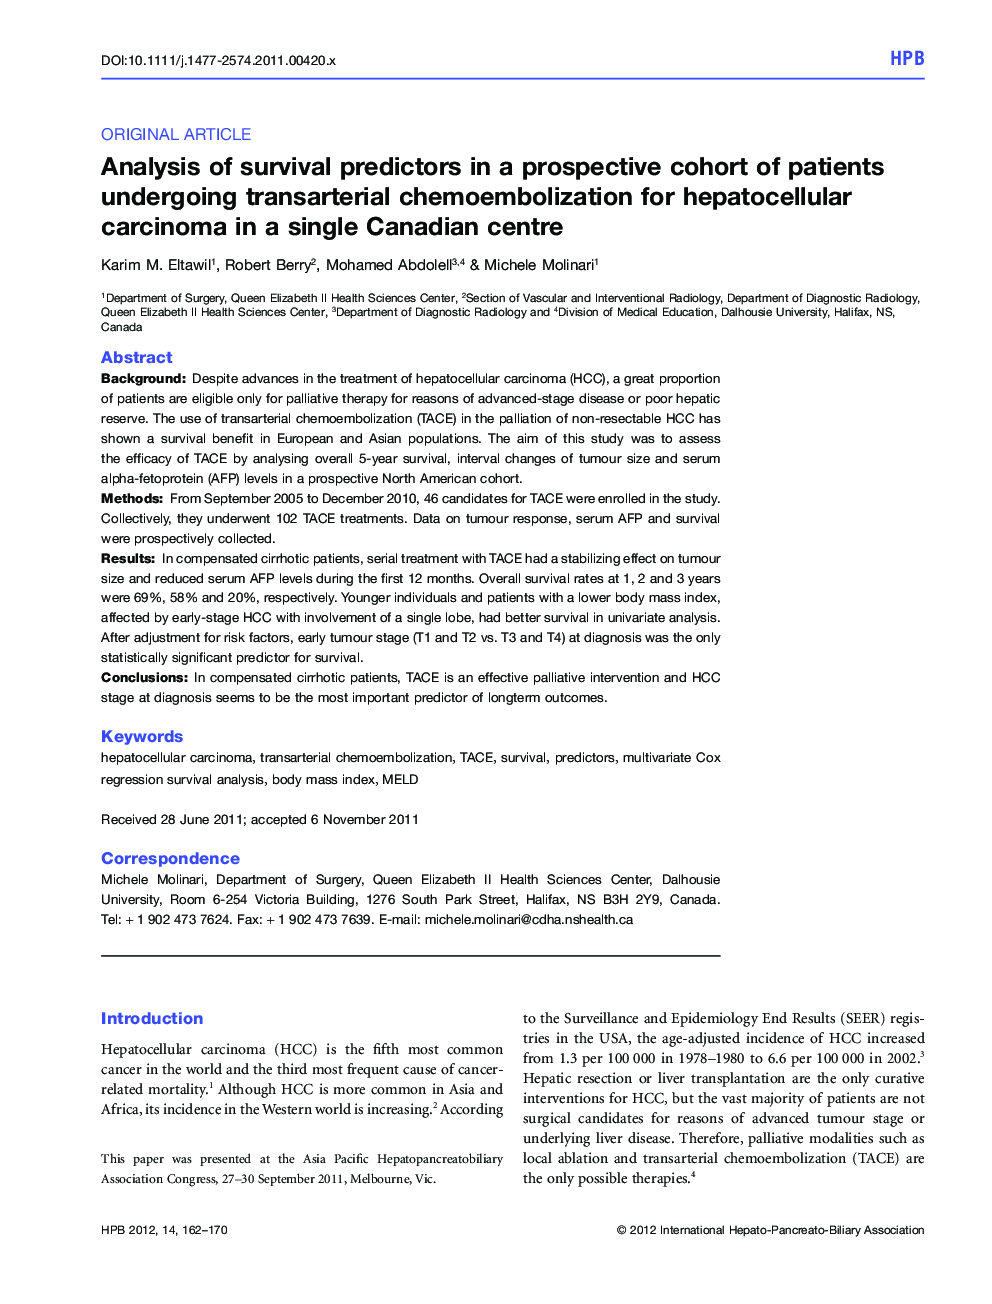 Analysis of survival predictors in a prospective cohort of patients undergoing transarterial chemoembolization for hepatocellular carcinoma in a single Canadian centre